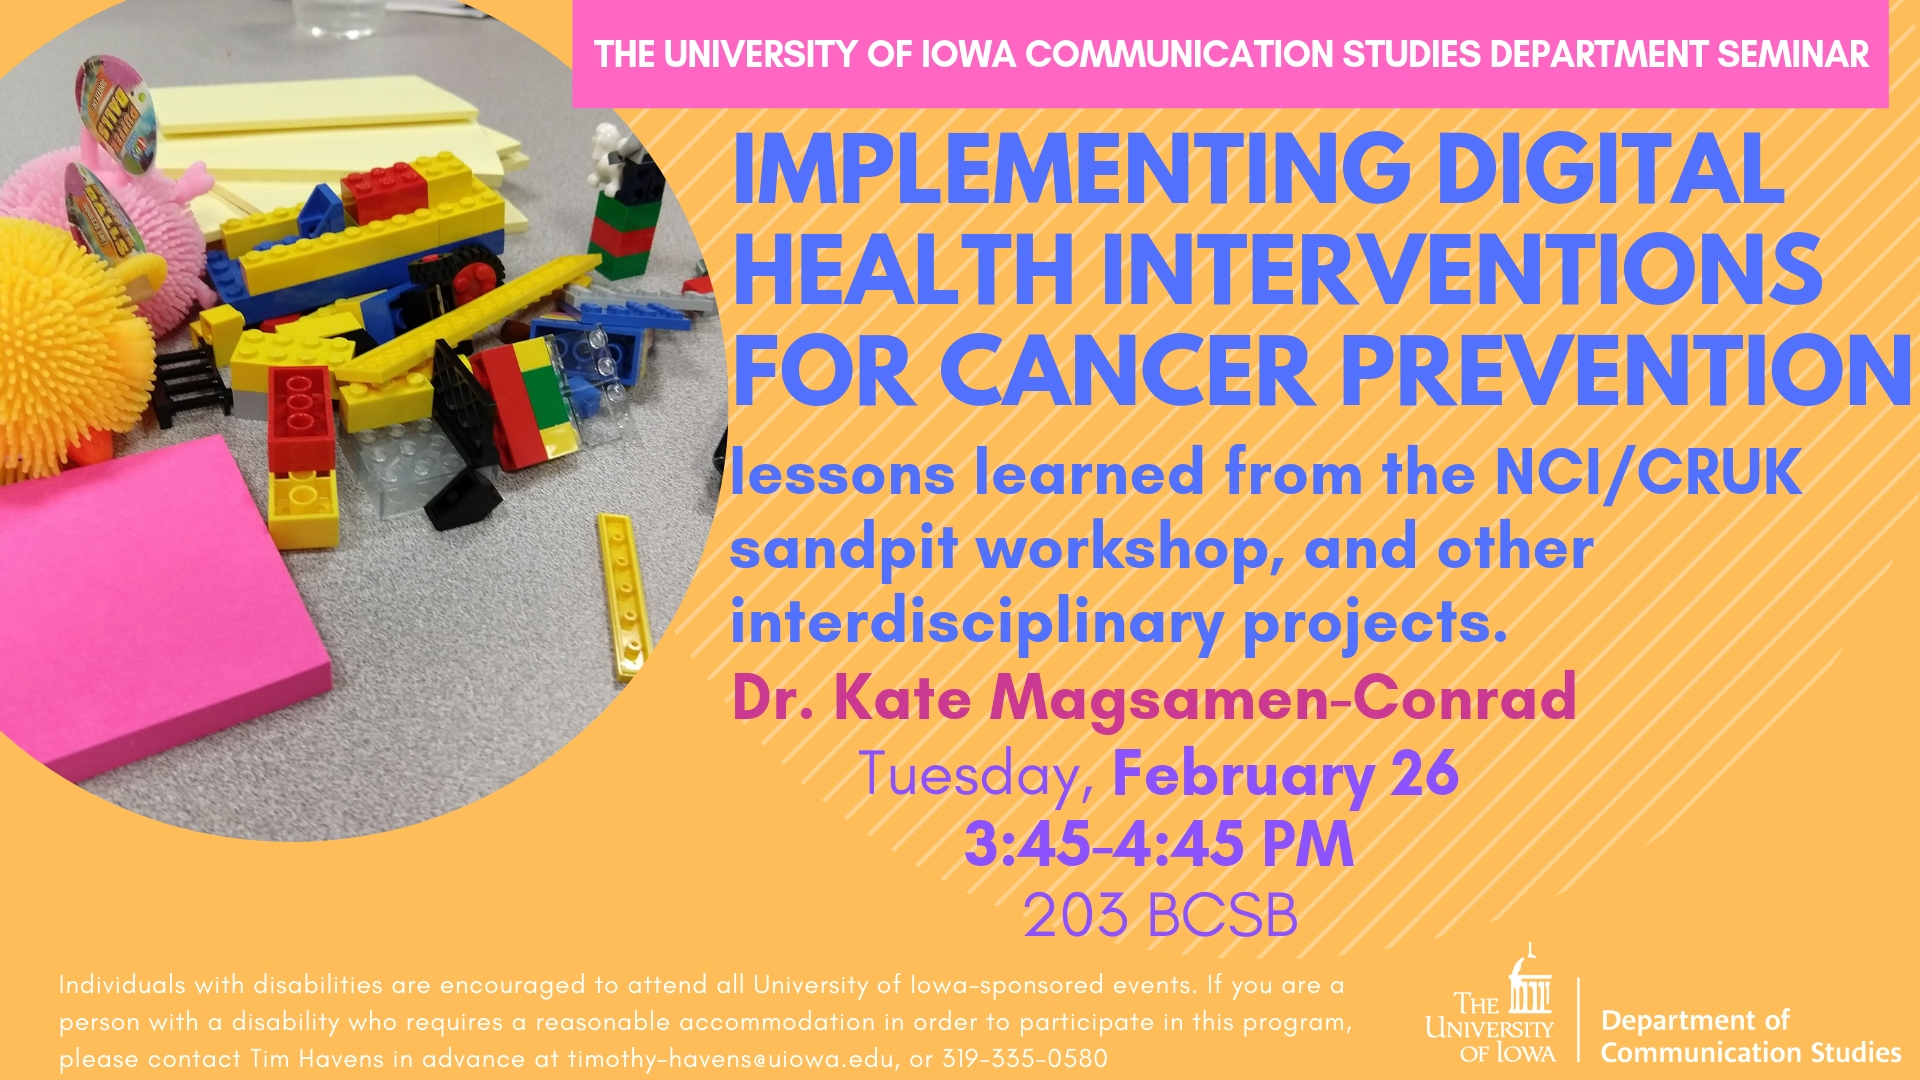 Communication Studies Department Seminar: Implementing Digital Health Interventions for Cancer Prevention: lessons learned from the NCI/CRUK sandpit workshop, and other interdisciplinary prokects. Dr. Kate Magsamen-Conrad. Tuesday, February 12, 3:45-4:45 PM, 203 BCSB